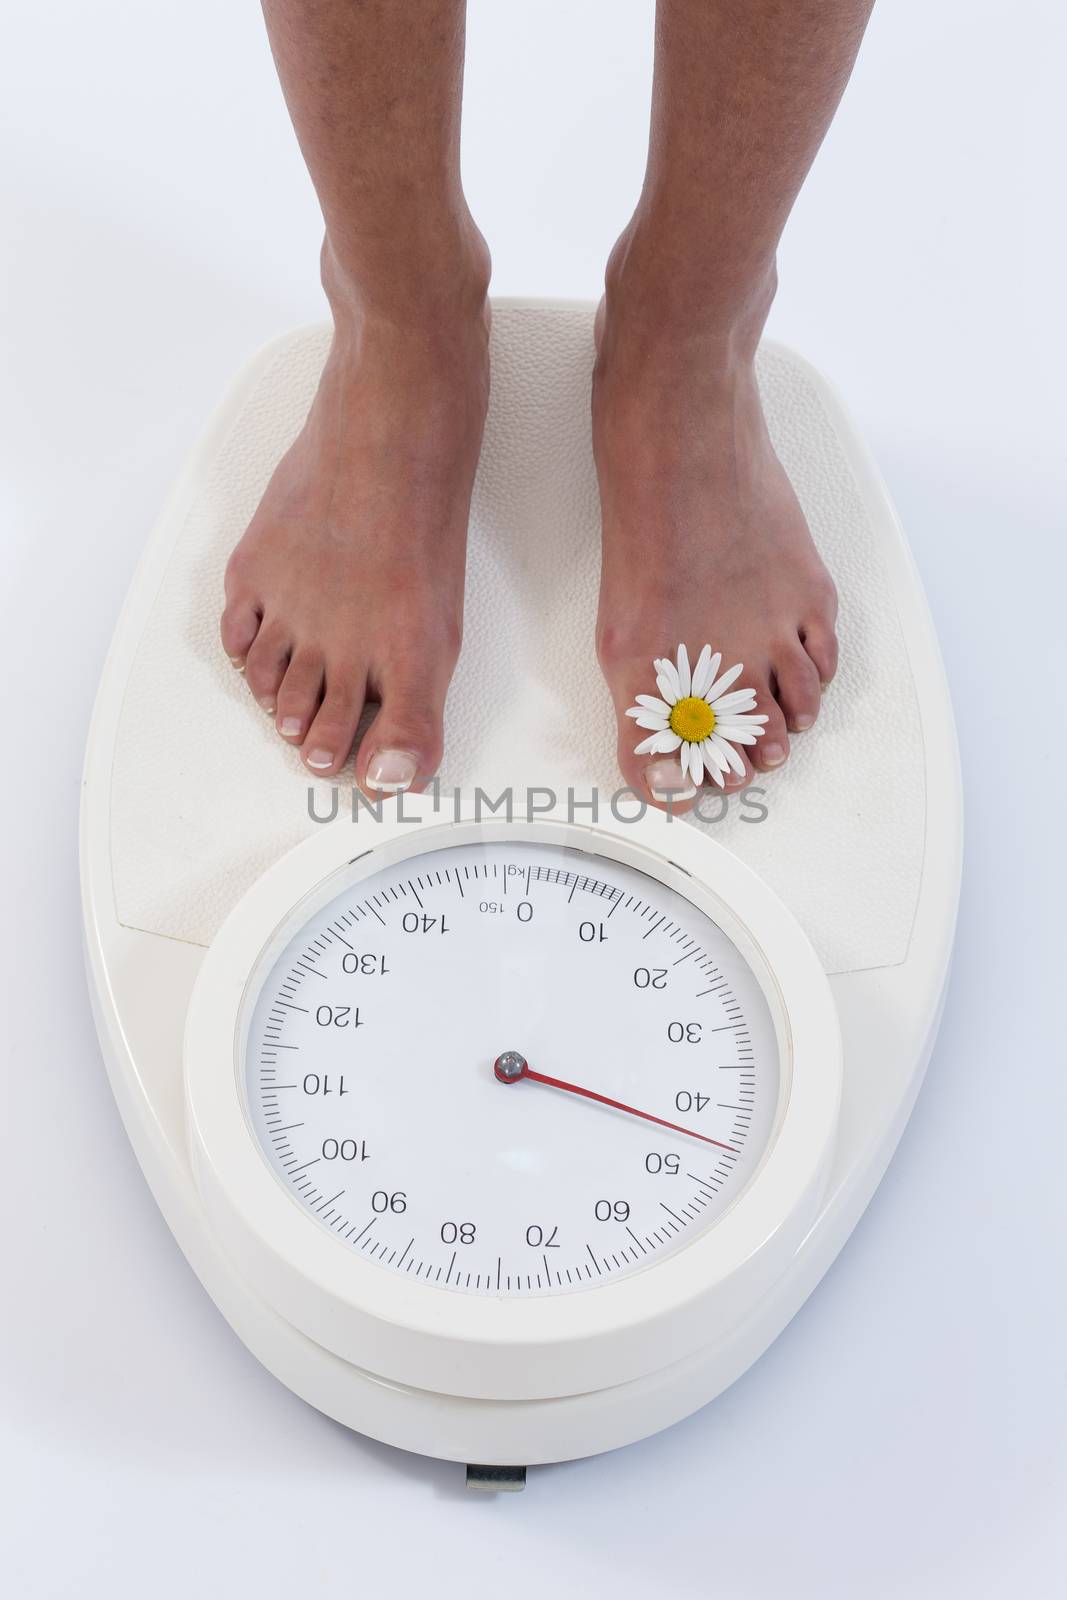 Female feet on scales on to floor by JPC-PROD